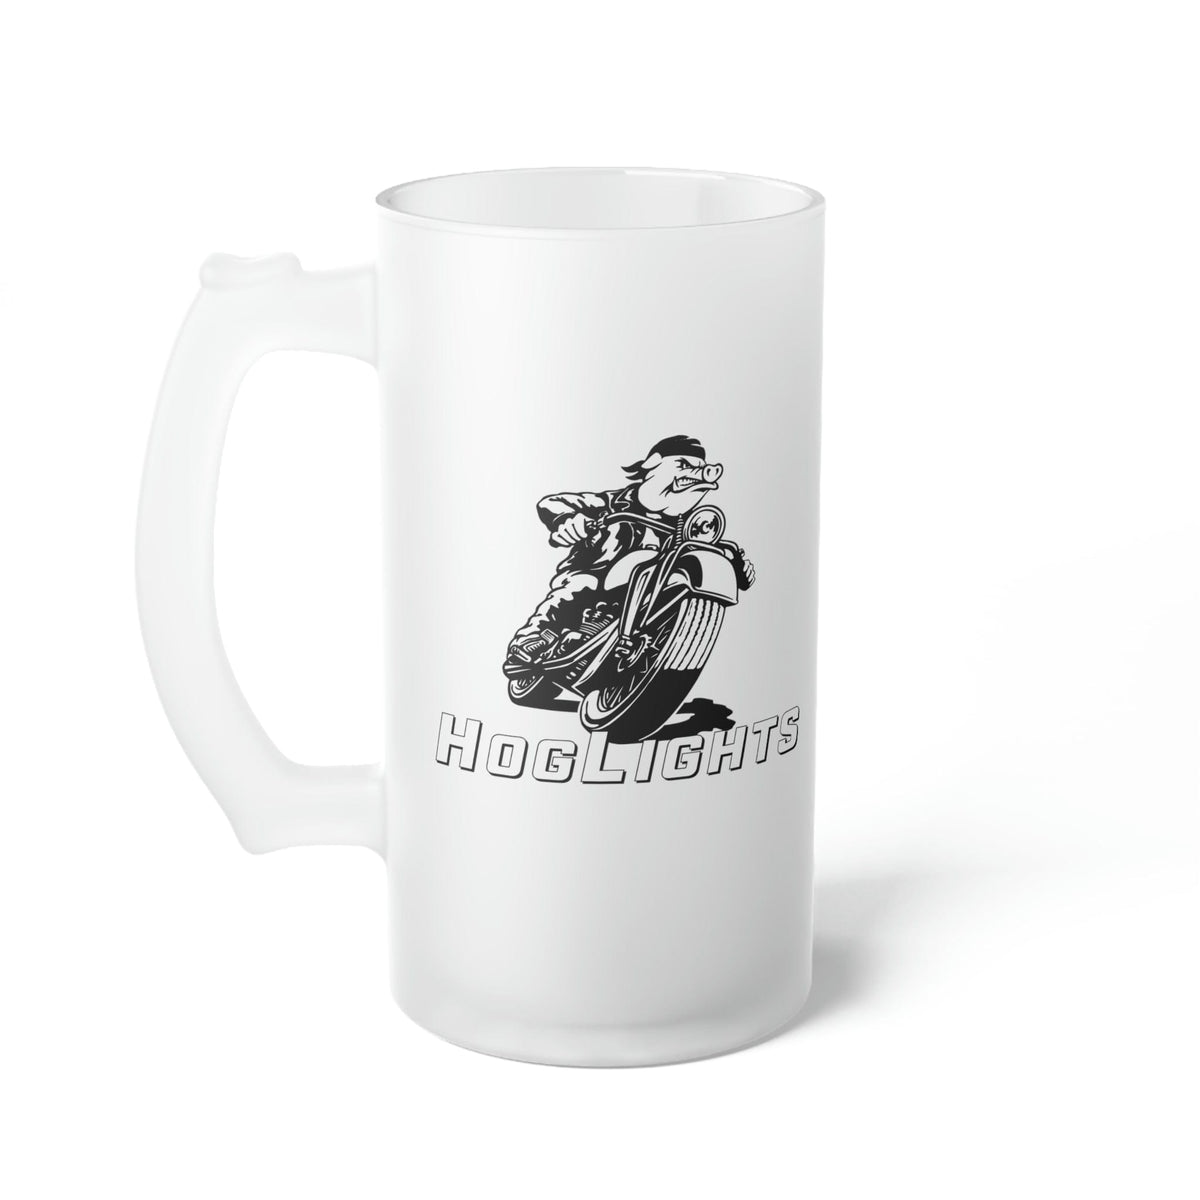 https://www.hoglights.shop/wp-content/uploads/1694/53/explore-our-frosted-glass-beer-mug-printify-s-to-find-the-real-deal_2.jpg